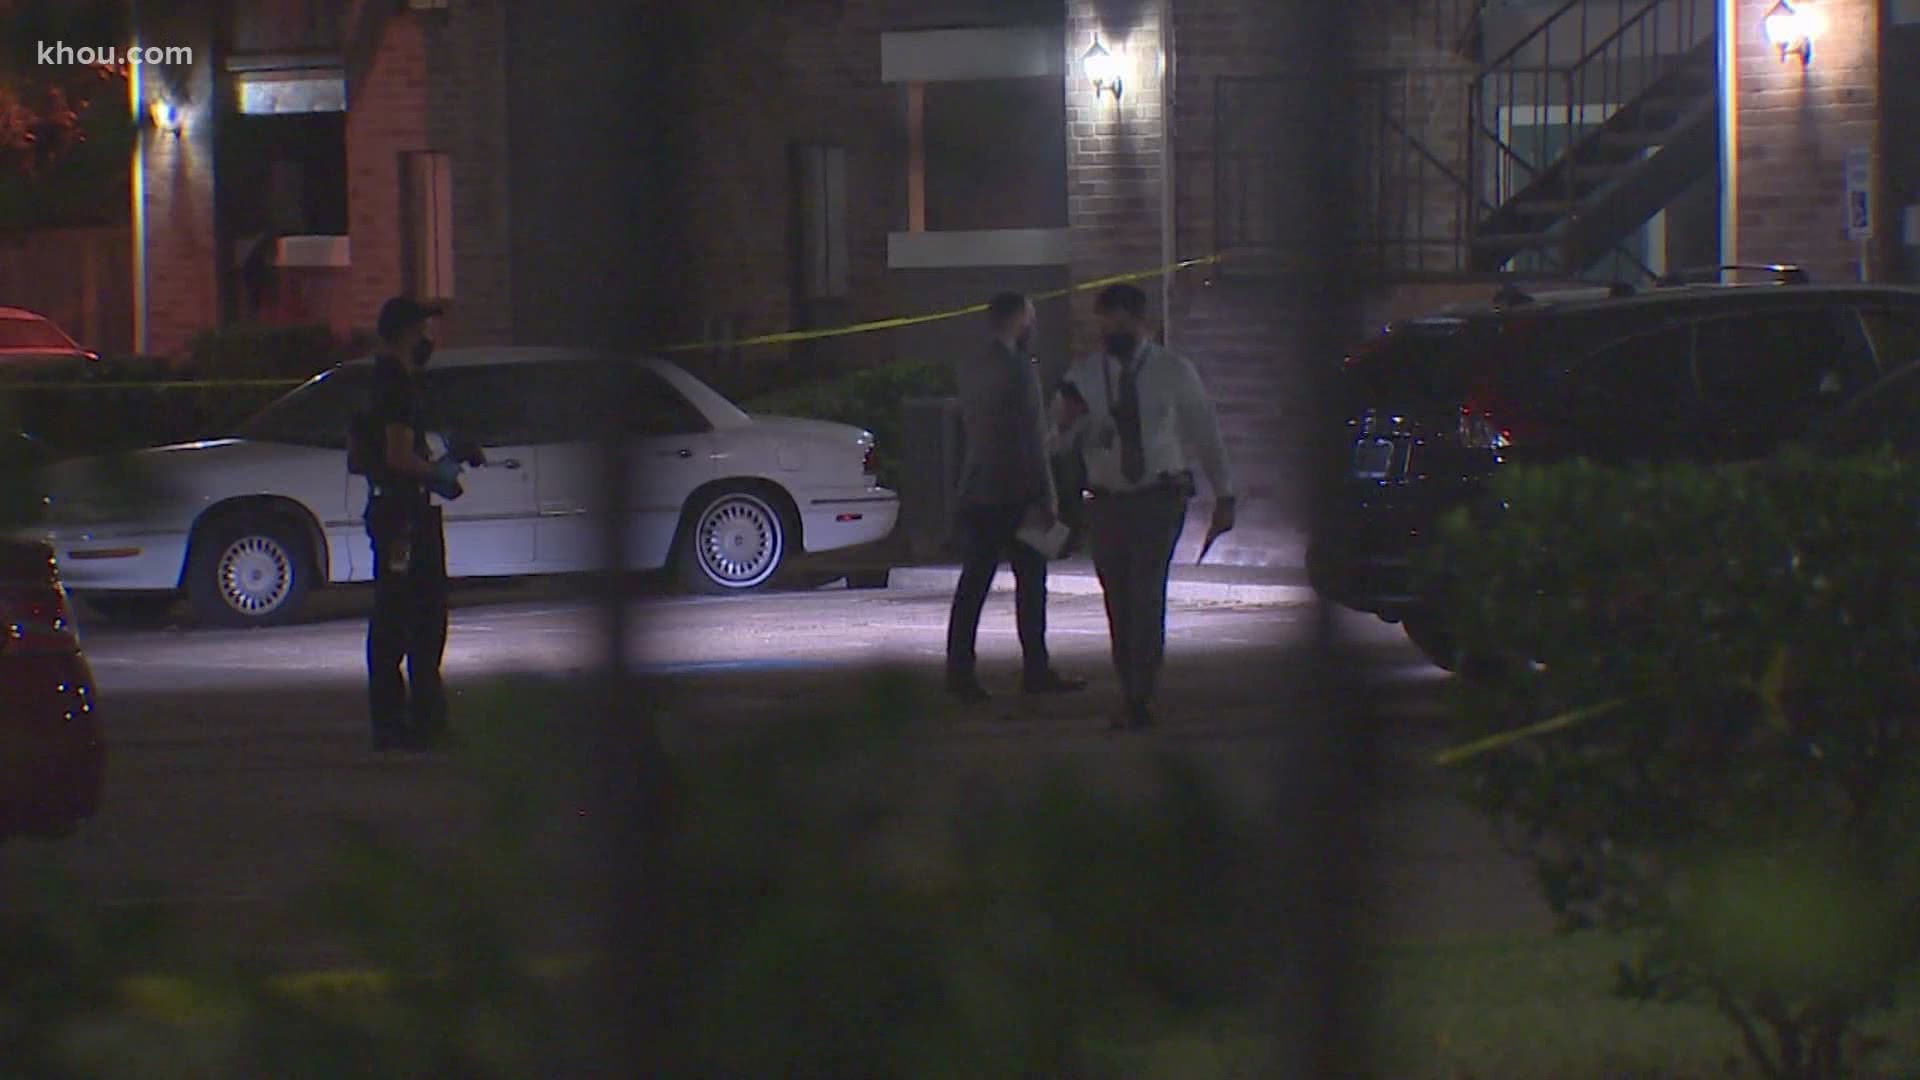 Police are investigating after a man was shot to death outside an apartment complex in southwest Houston, officials said.